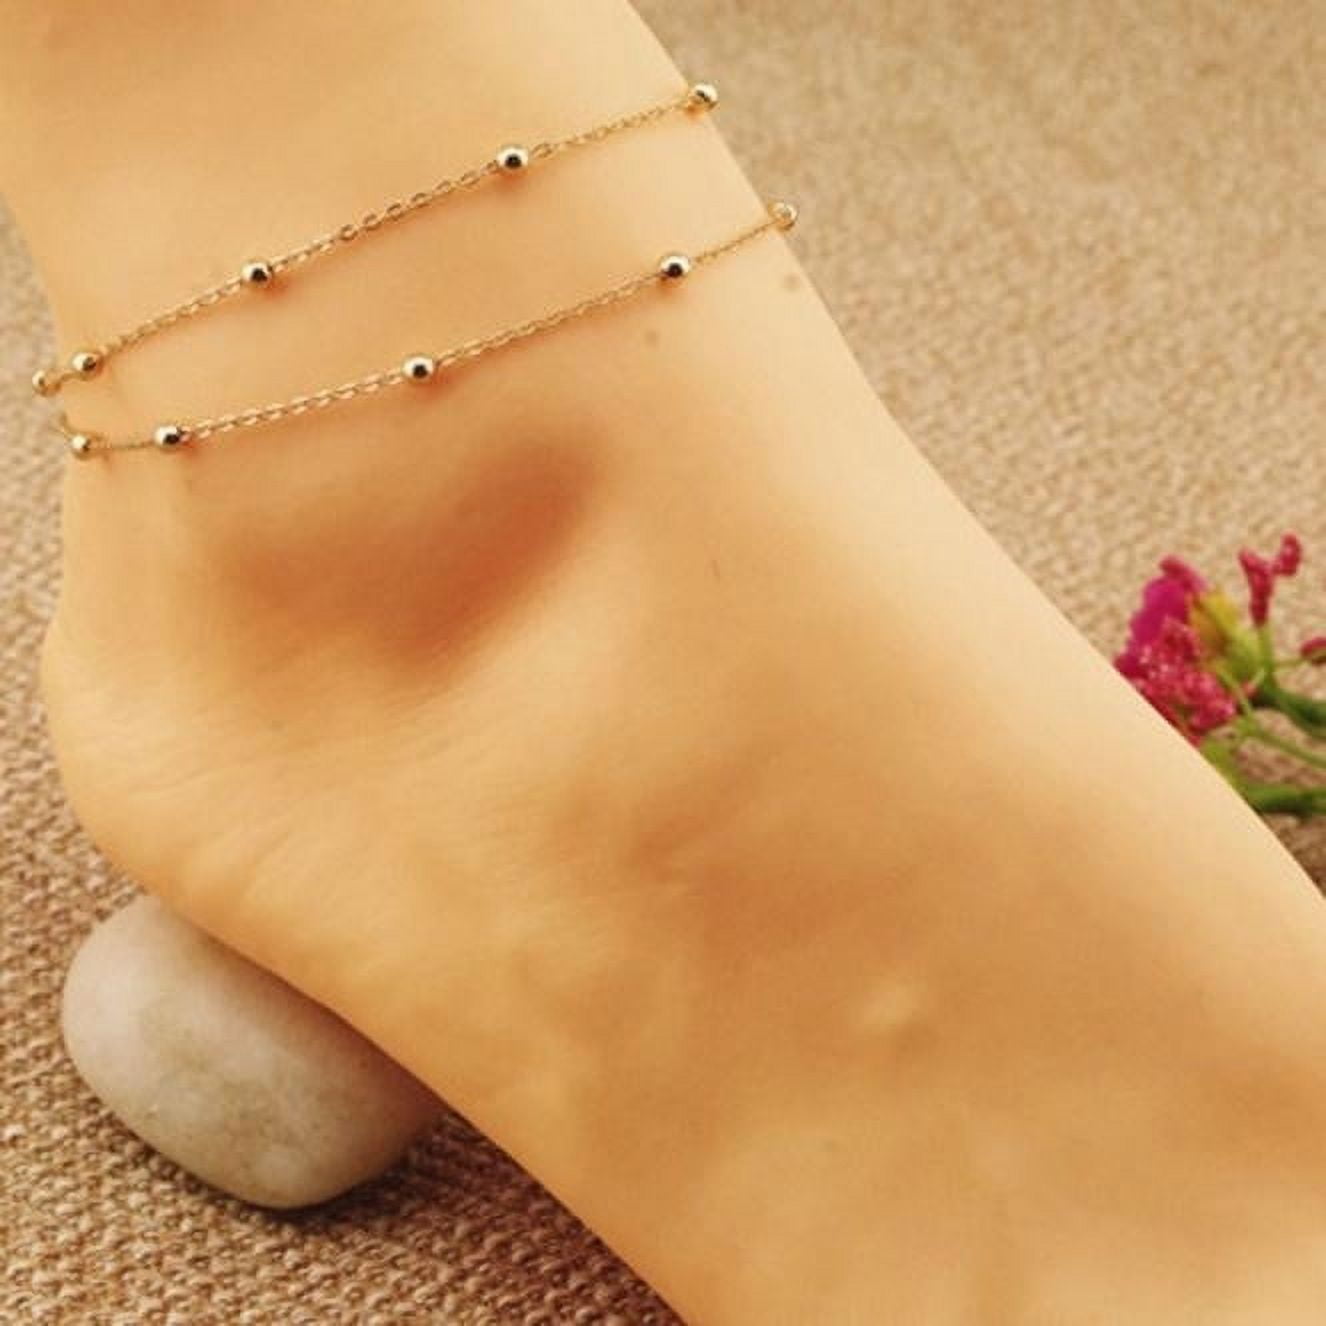 Gold Double Foot Chain Anklet Ankle Bracelet Barefoot Beach Foot ...